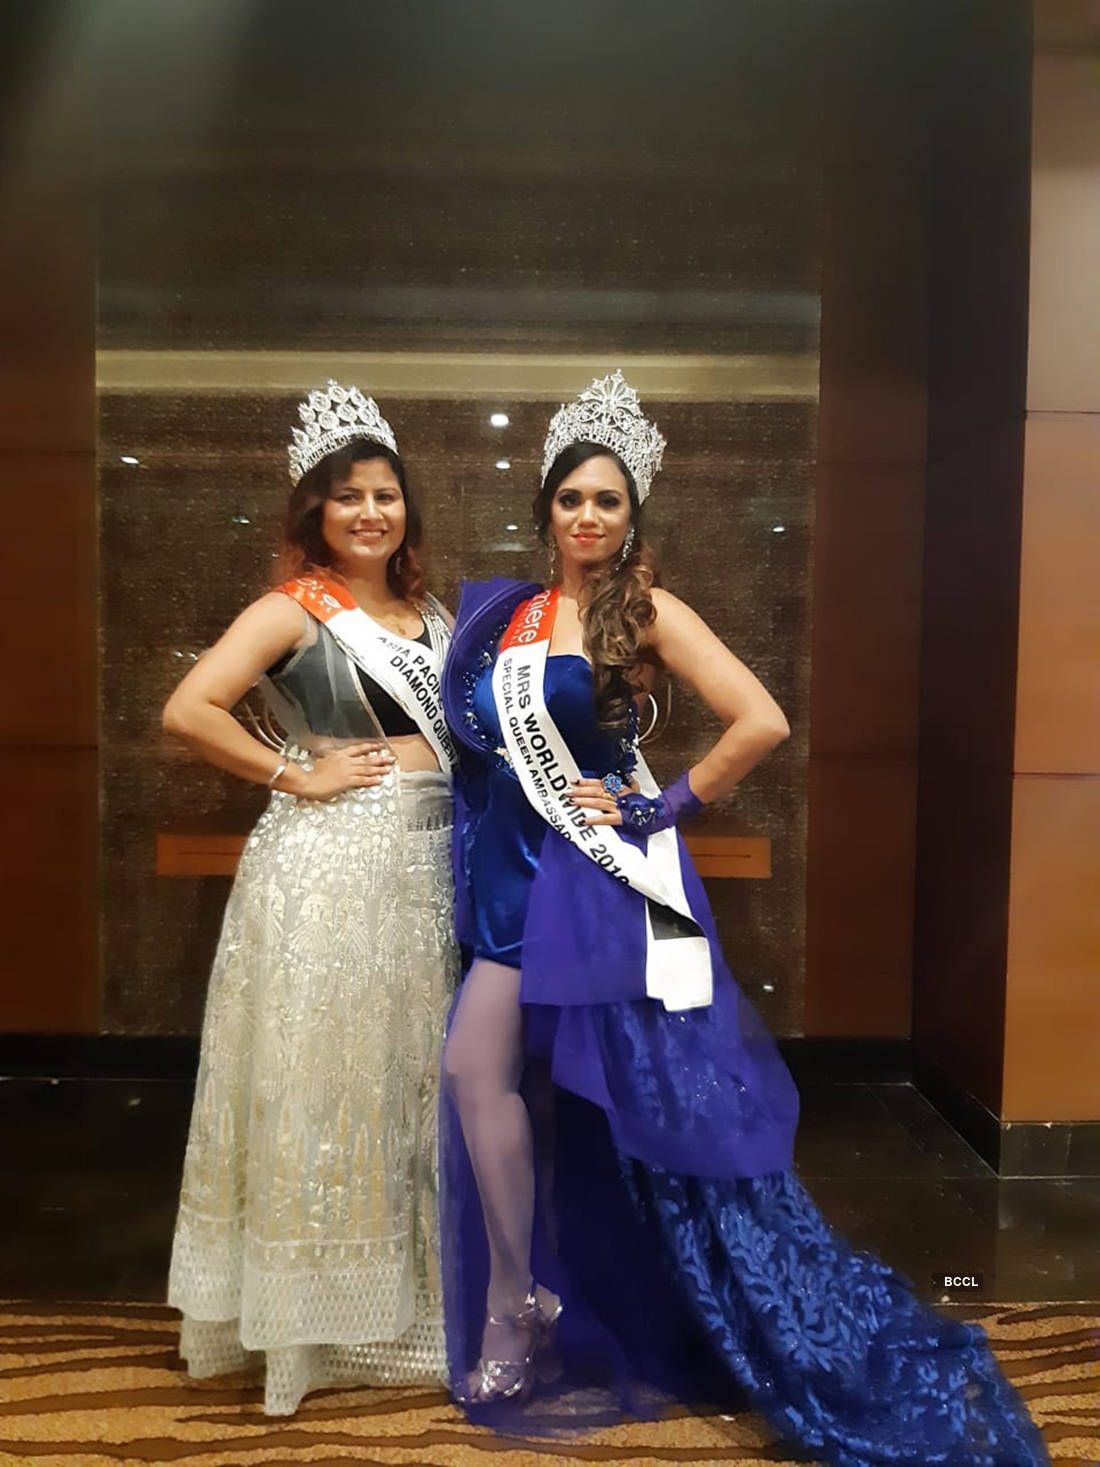 Pictures of the gorgeous Shwetha Niranjan who bags a title at an International Beauty Pageant